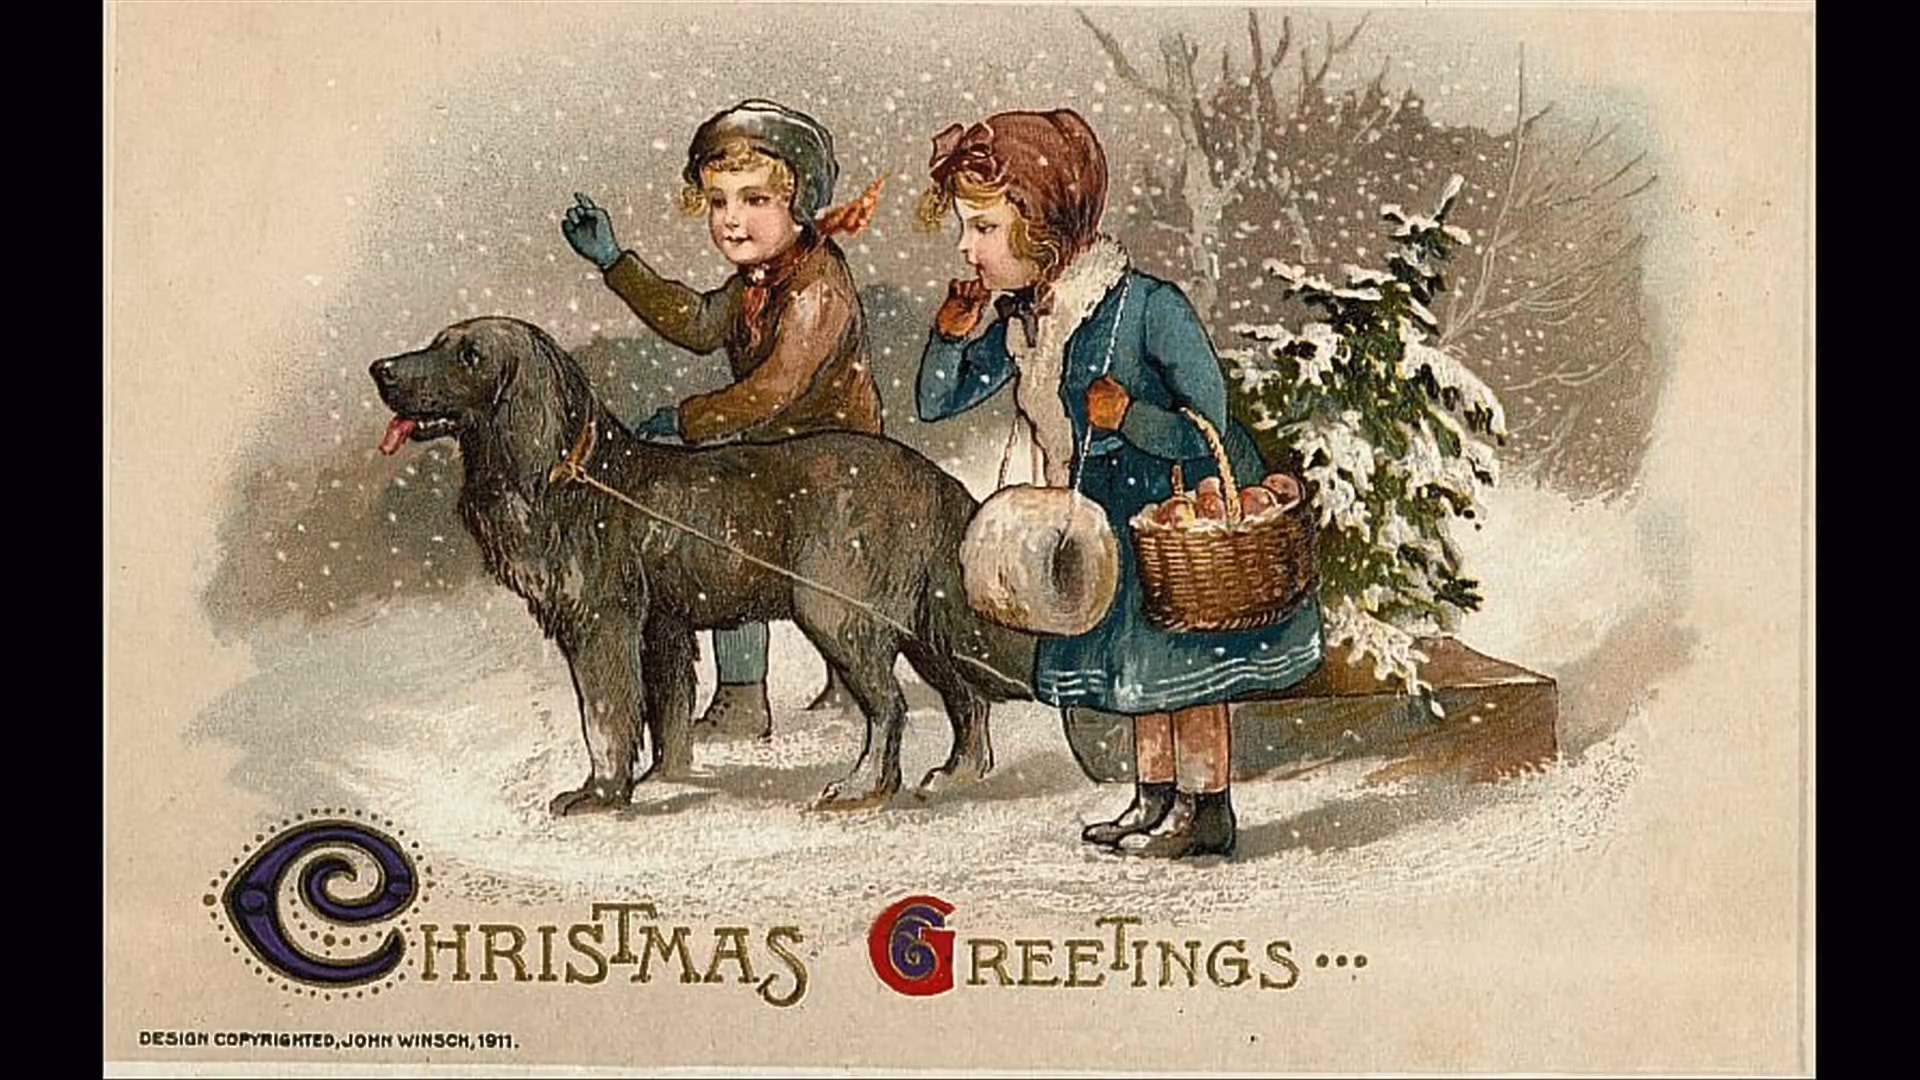 OLD FASHIONED CHRISTMAS AND WINTER SCENES h.jpg